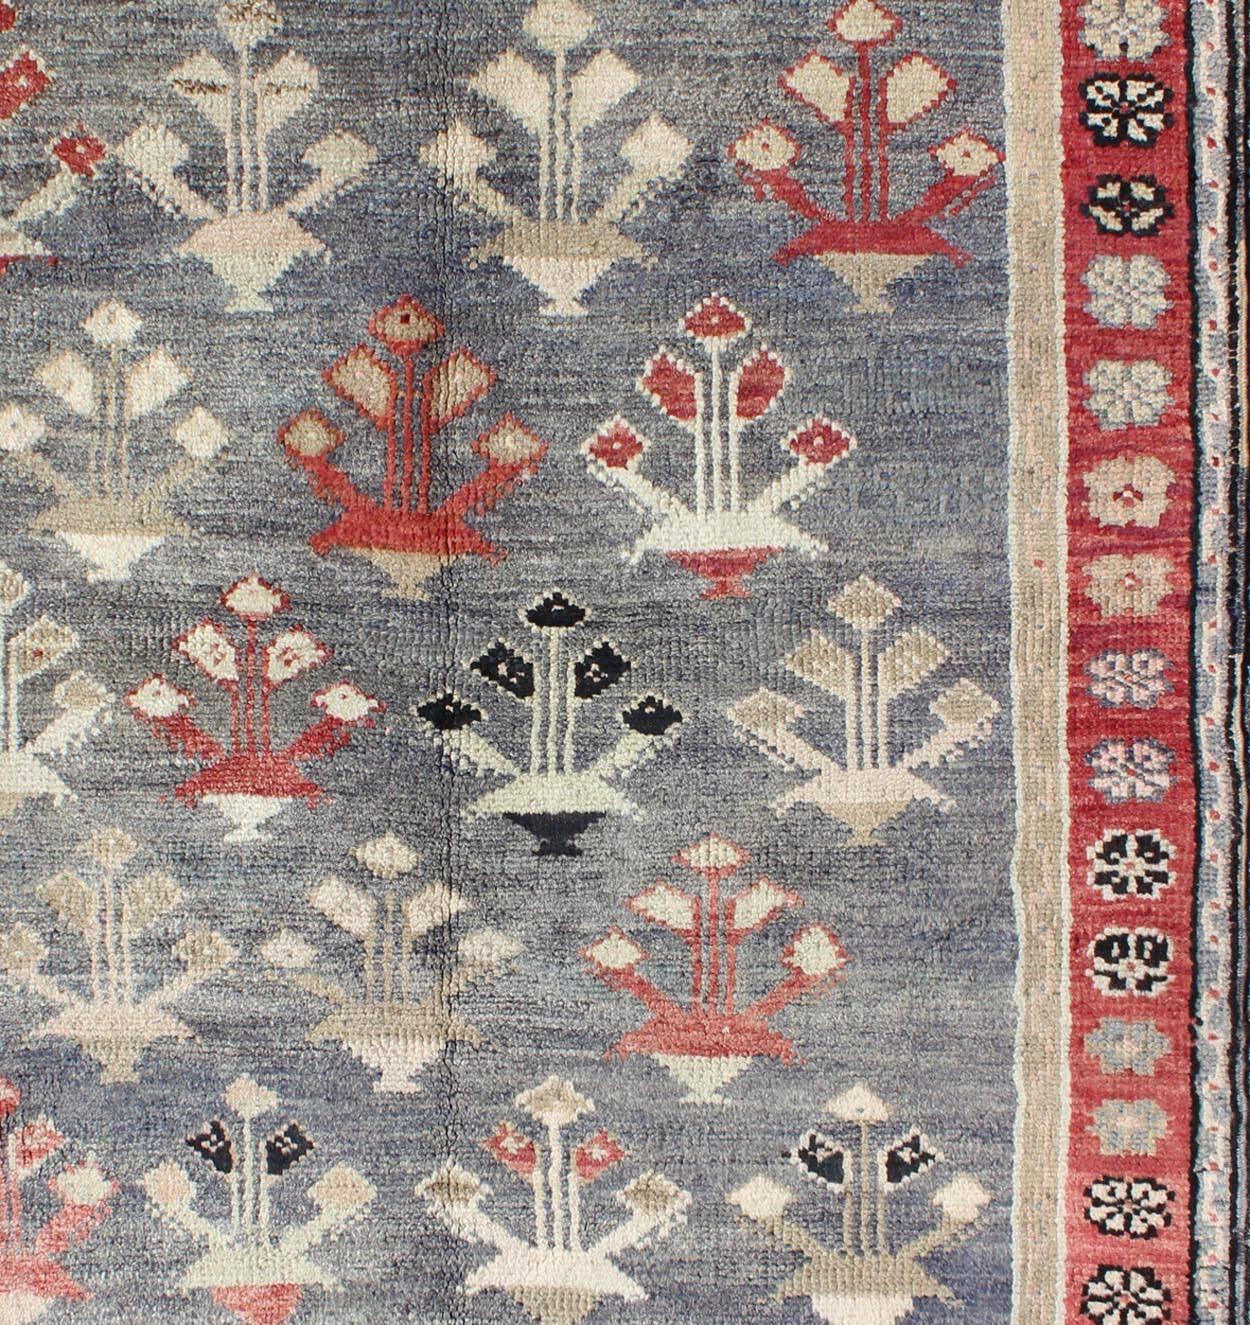 Vintage Turkish Oushak Rug in Red, Gray, Blue-Gray, Taupe and Ivory In Excellent Condition For Sale In Atlanta, GA